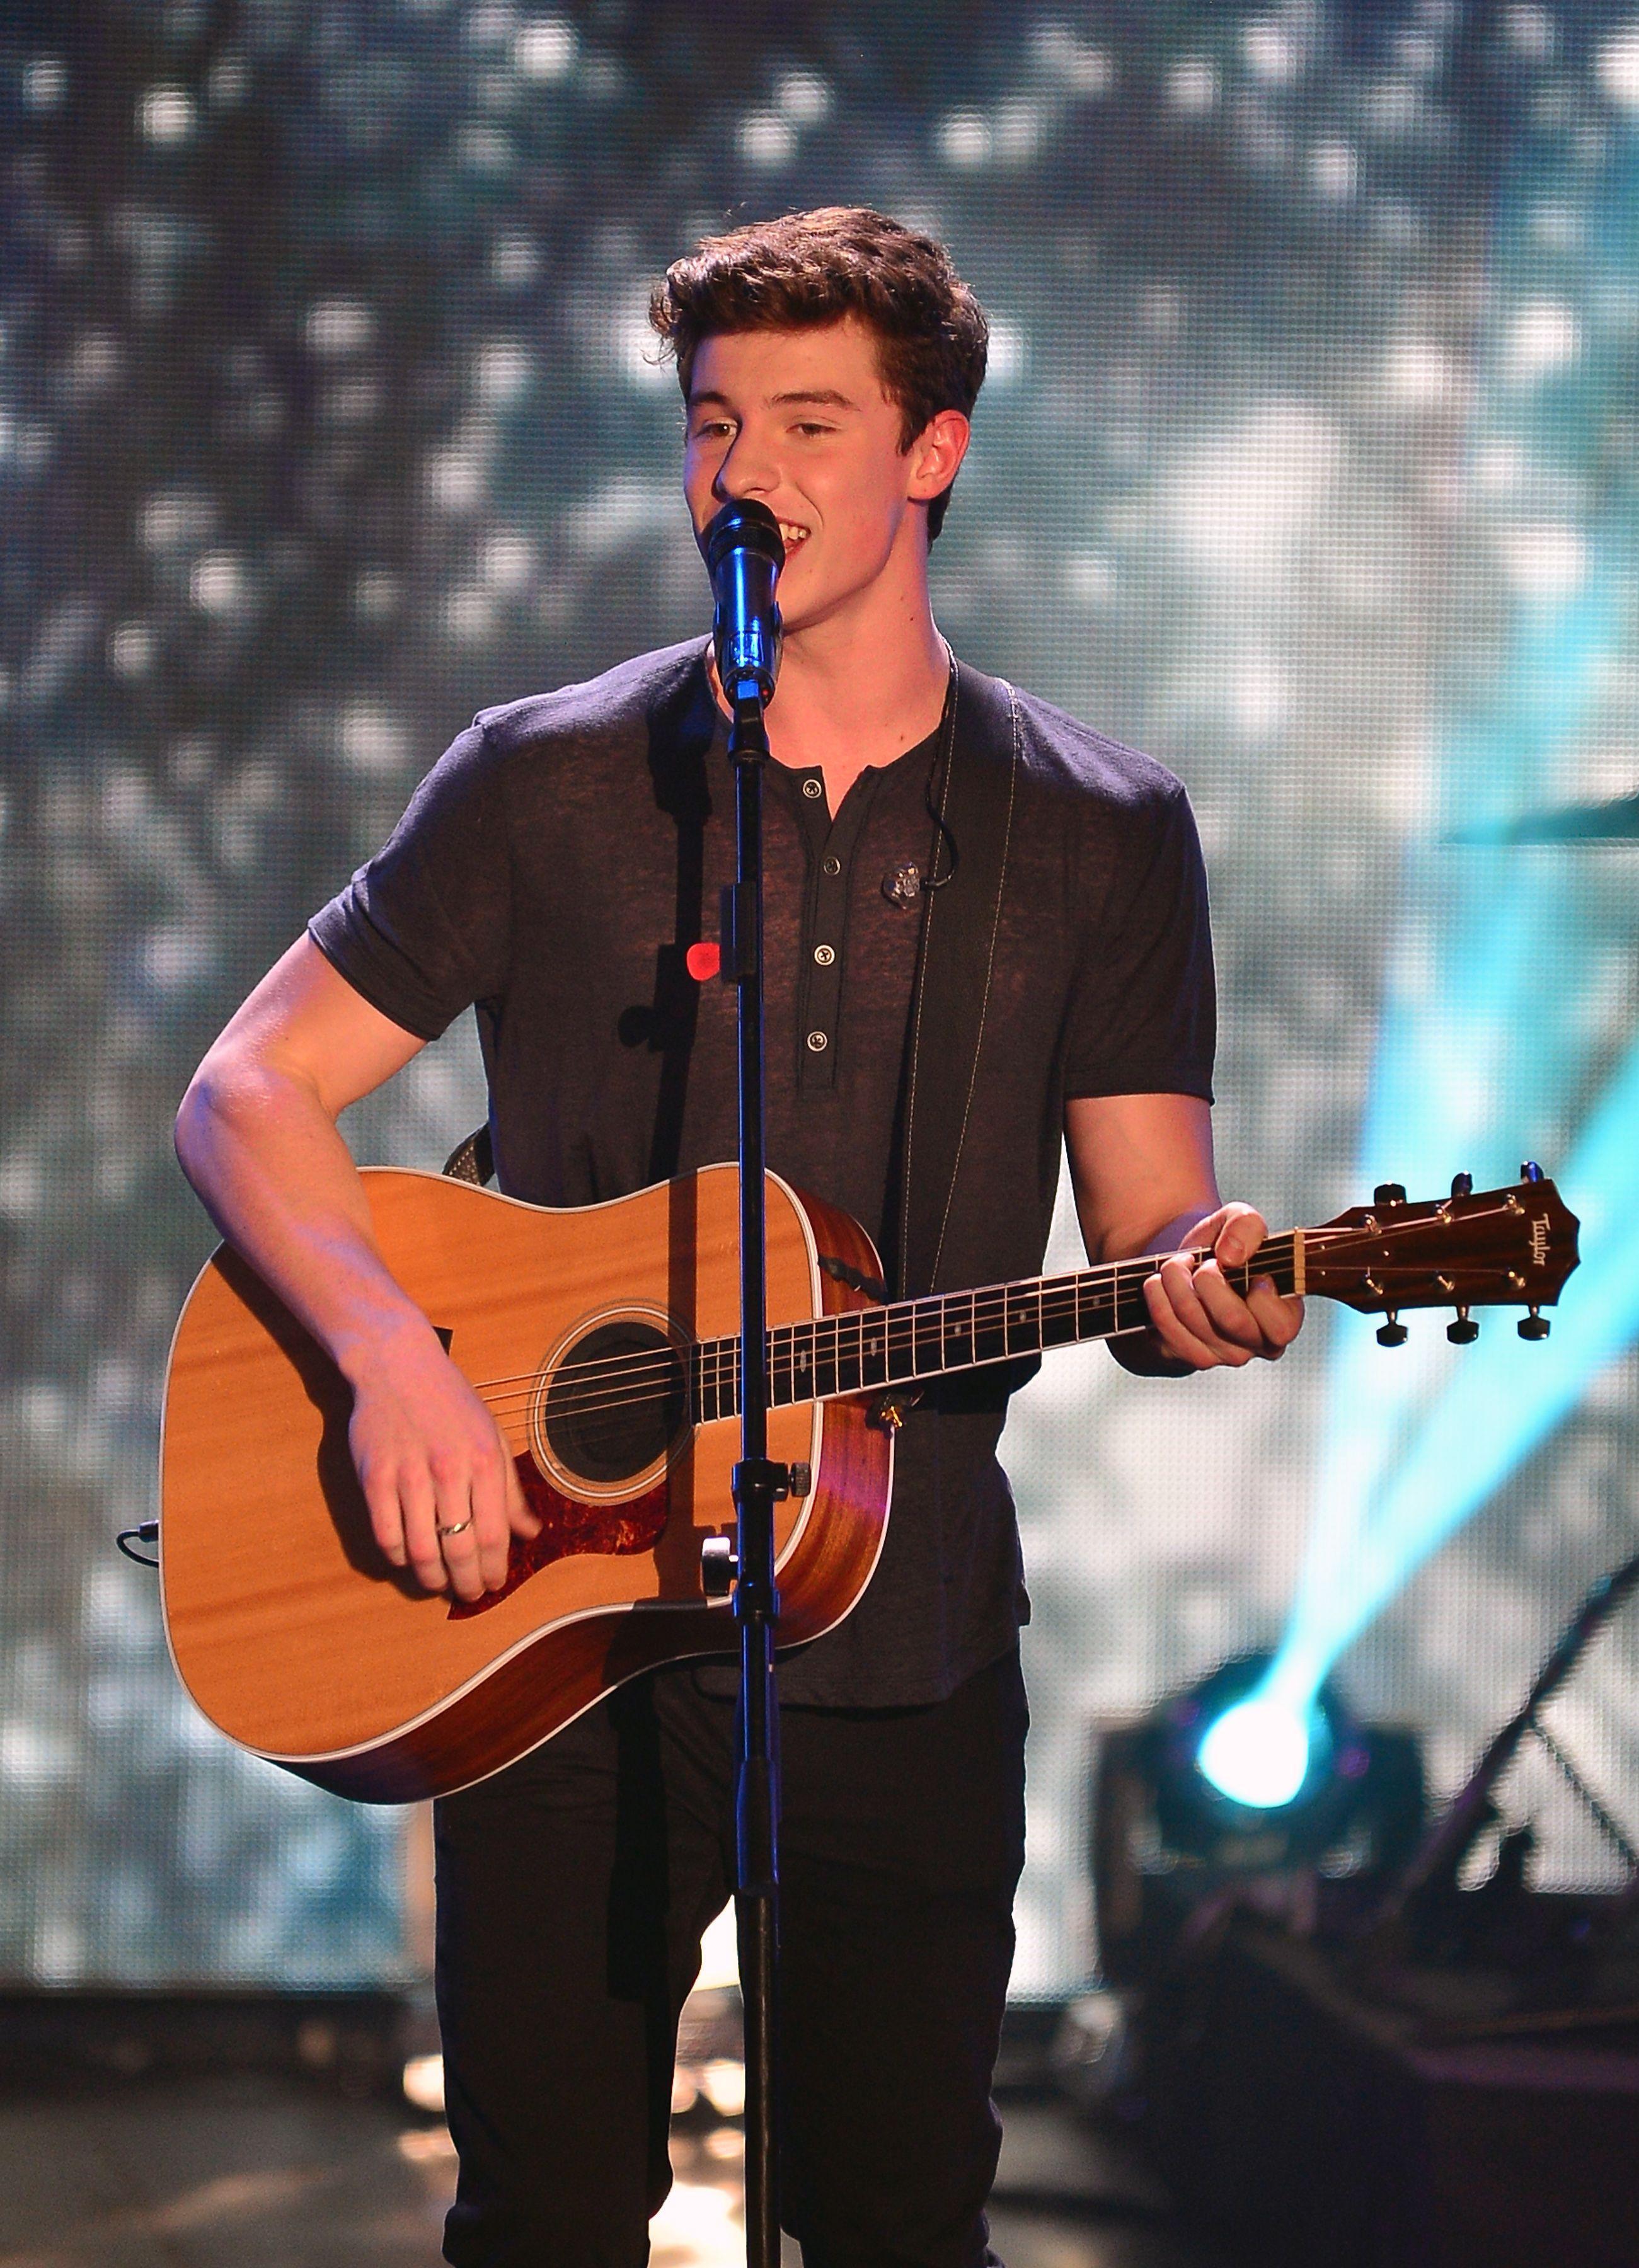 Shawn Mendes HD Image. Full HD Picture